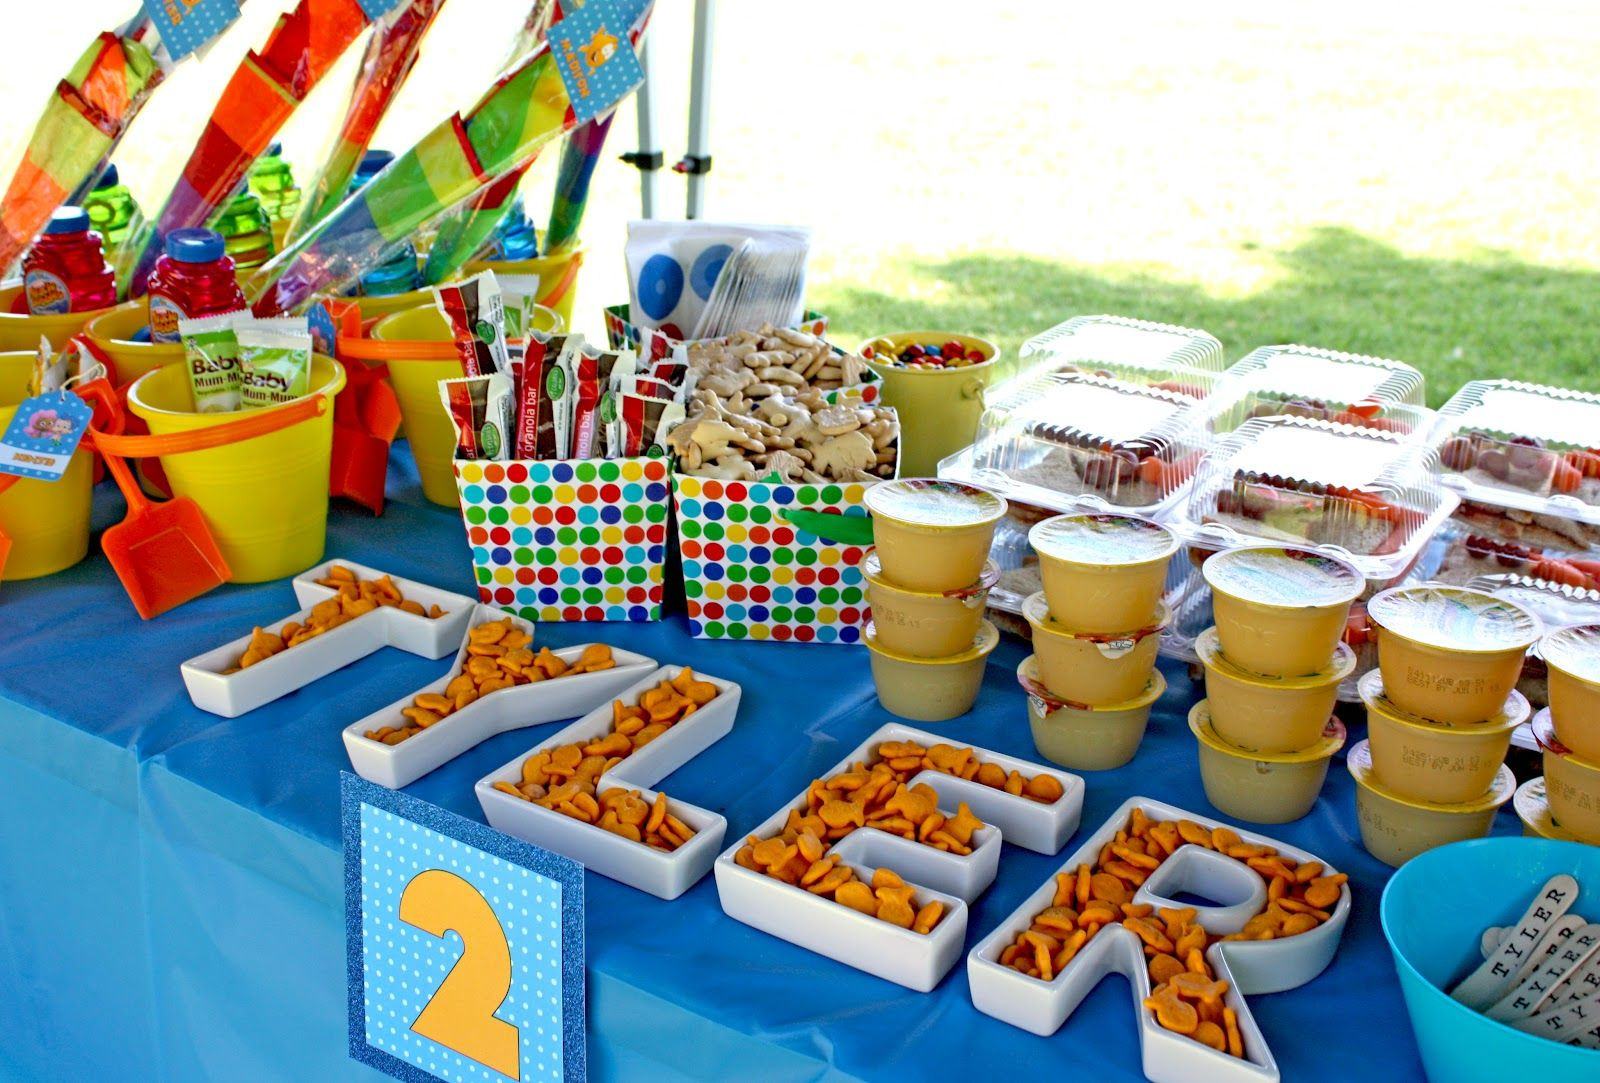 Park Birthday Party Food Ideas
 A Very Bubble Guppies Birthday